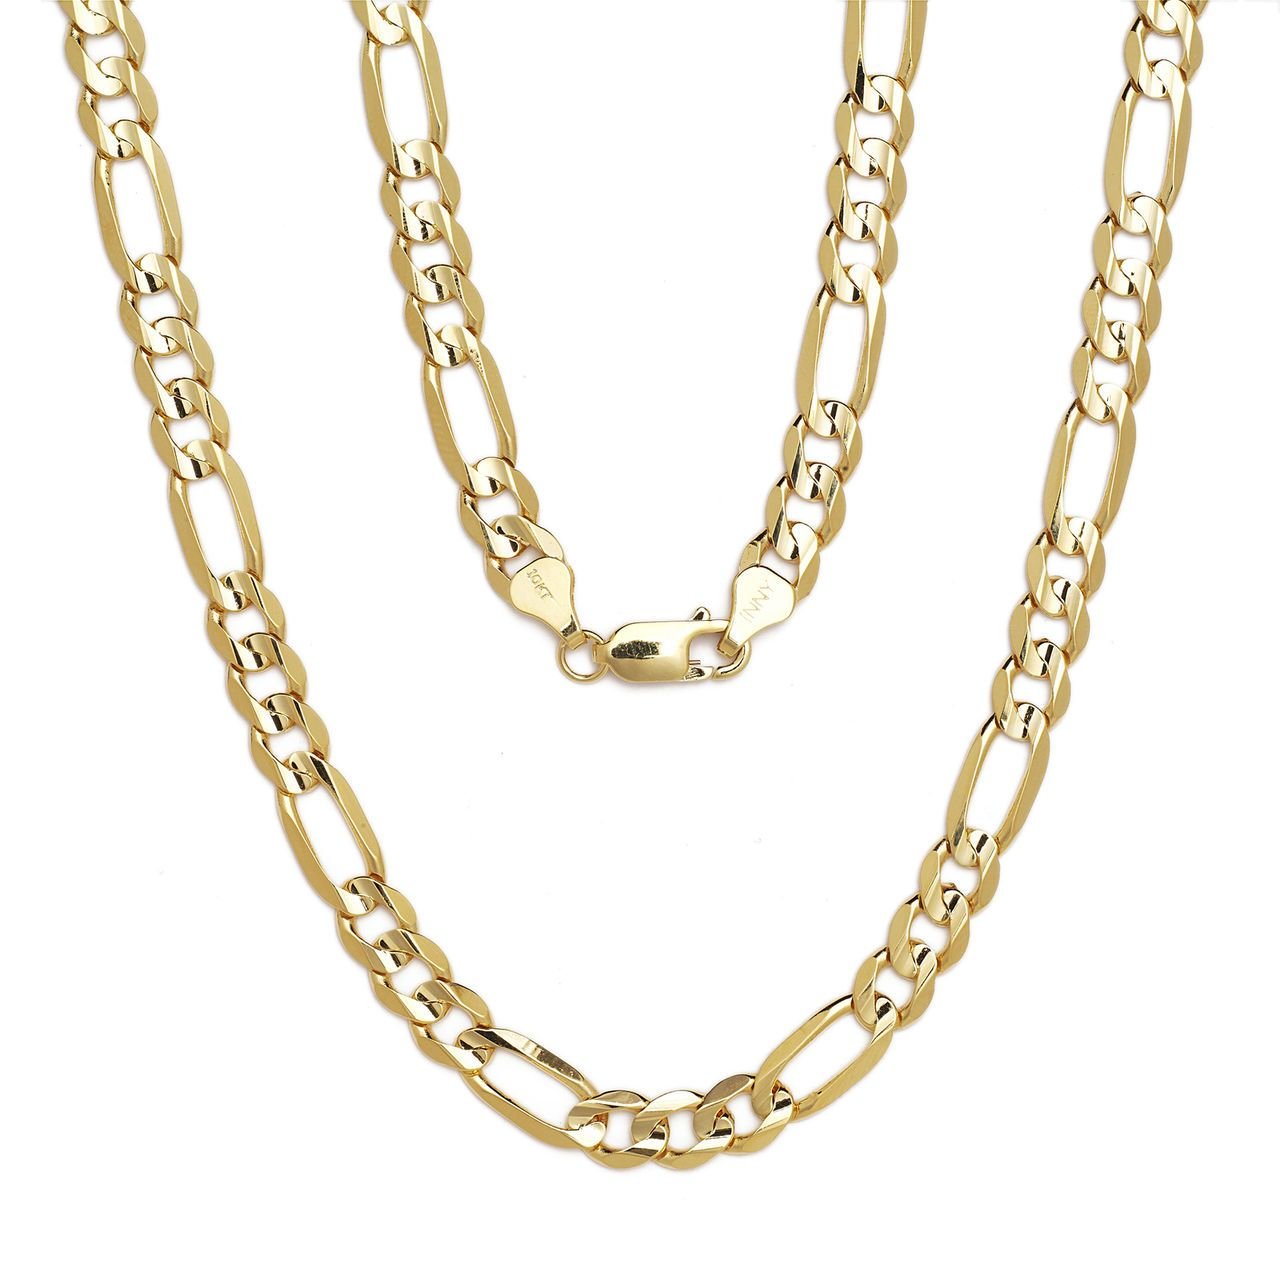 10k Yellow Gold Figaro Chain Necklace with Concave Look, 0.31 Inch (8mm)